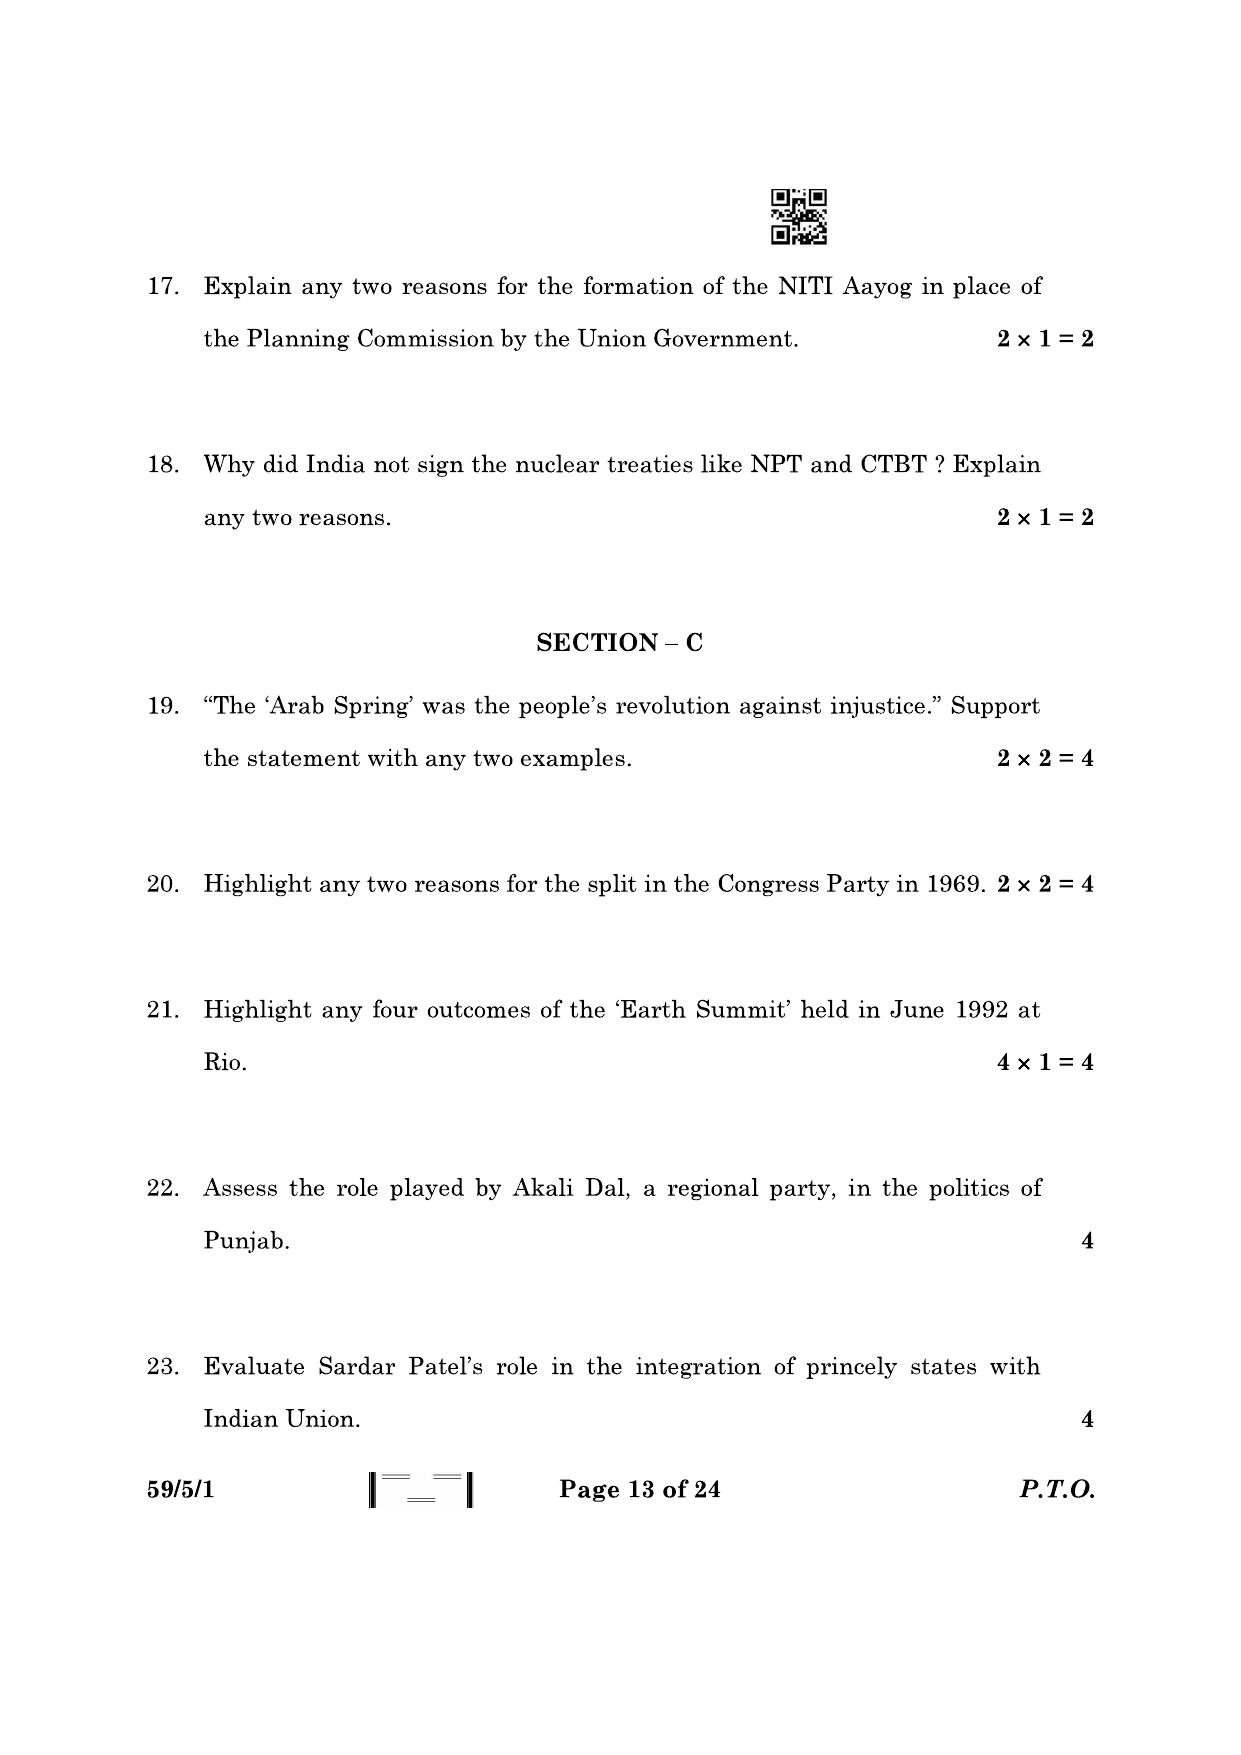 CBSE Class 12 59-5-1 Political Science 2023 Question Paper - Page 13